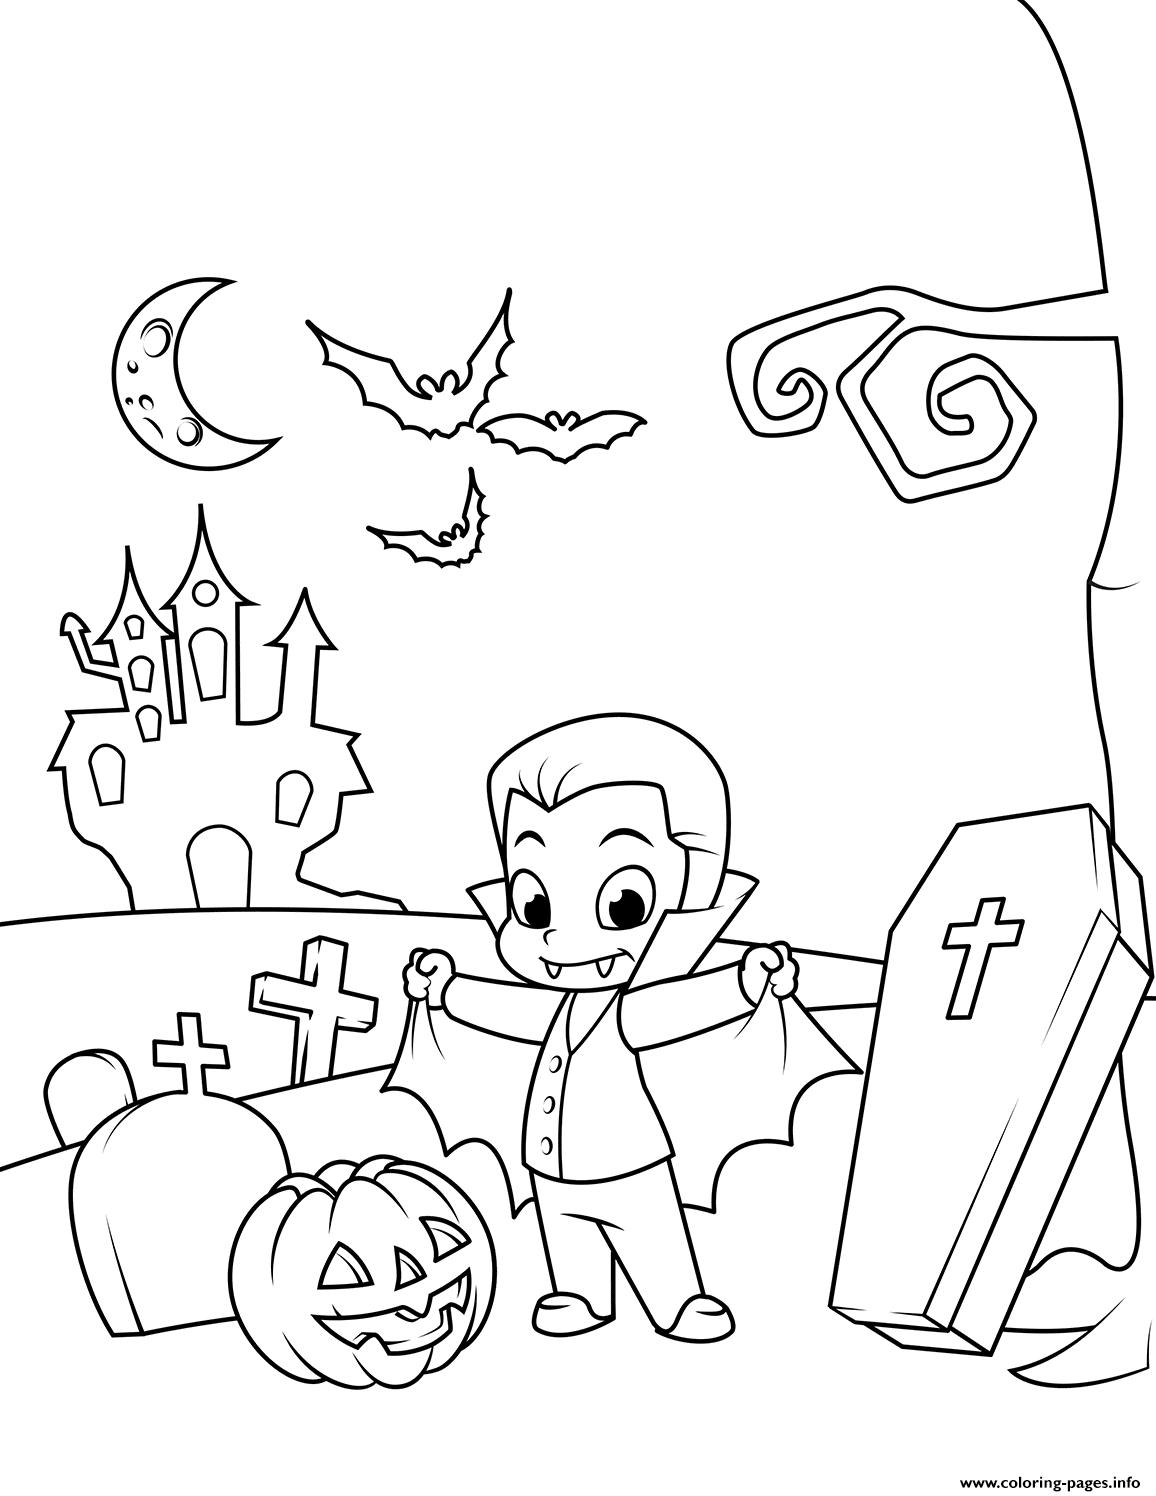 Cute Count Dracula In The Cemetery Halloween Coloring Pages Printable tout Halloween Dessin 